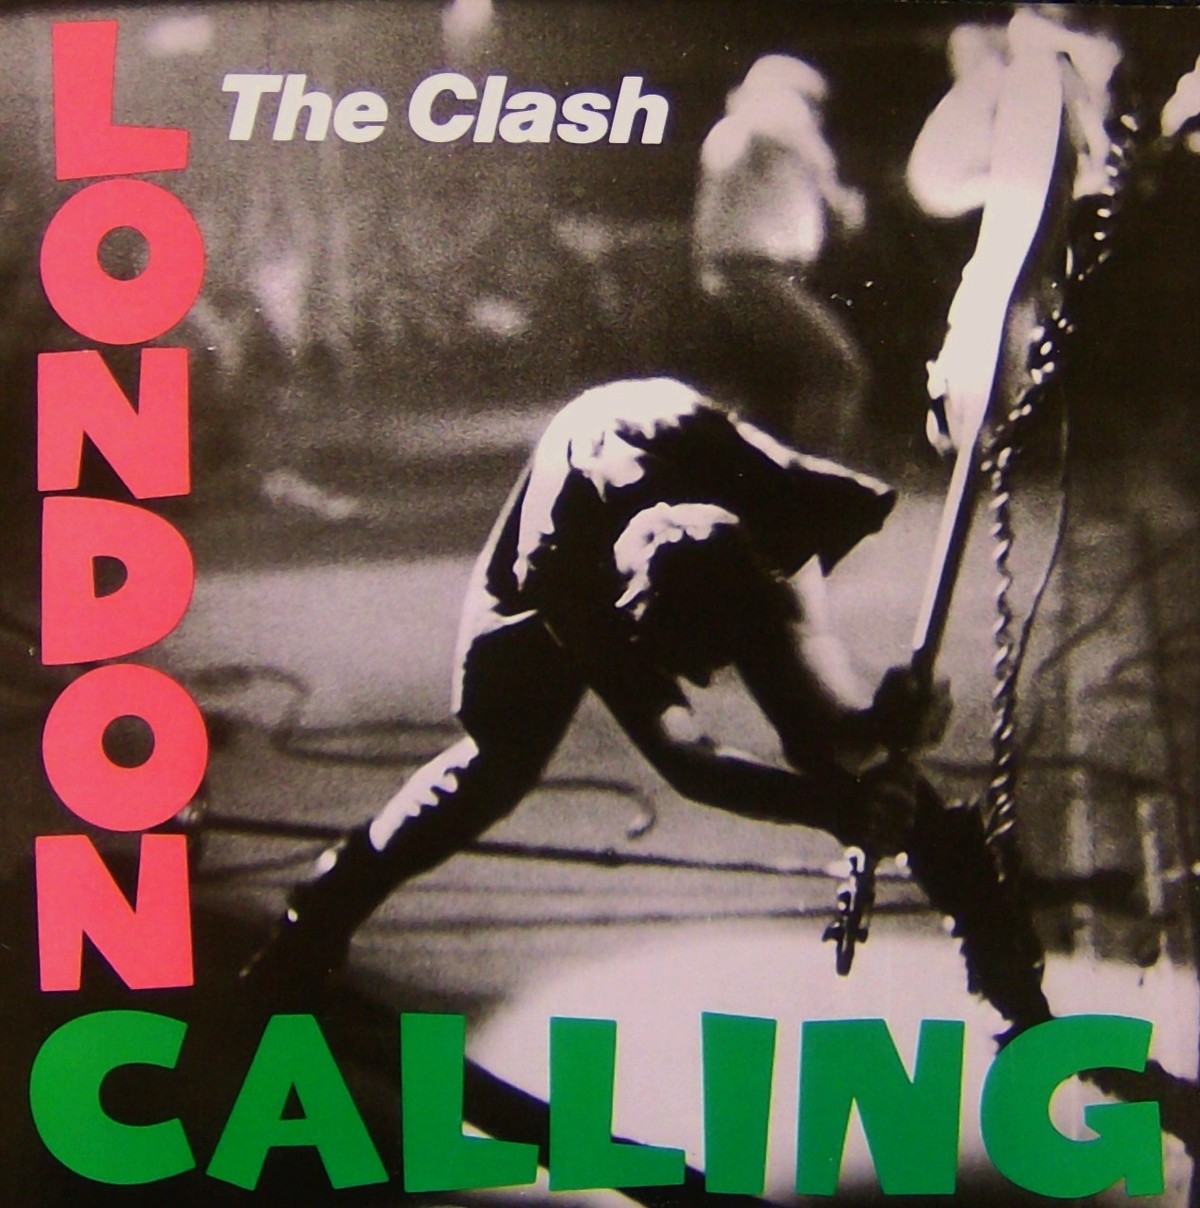 The Clash Album cover for "London Calling"